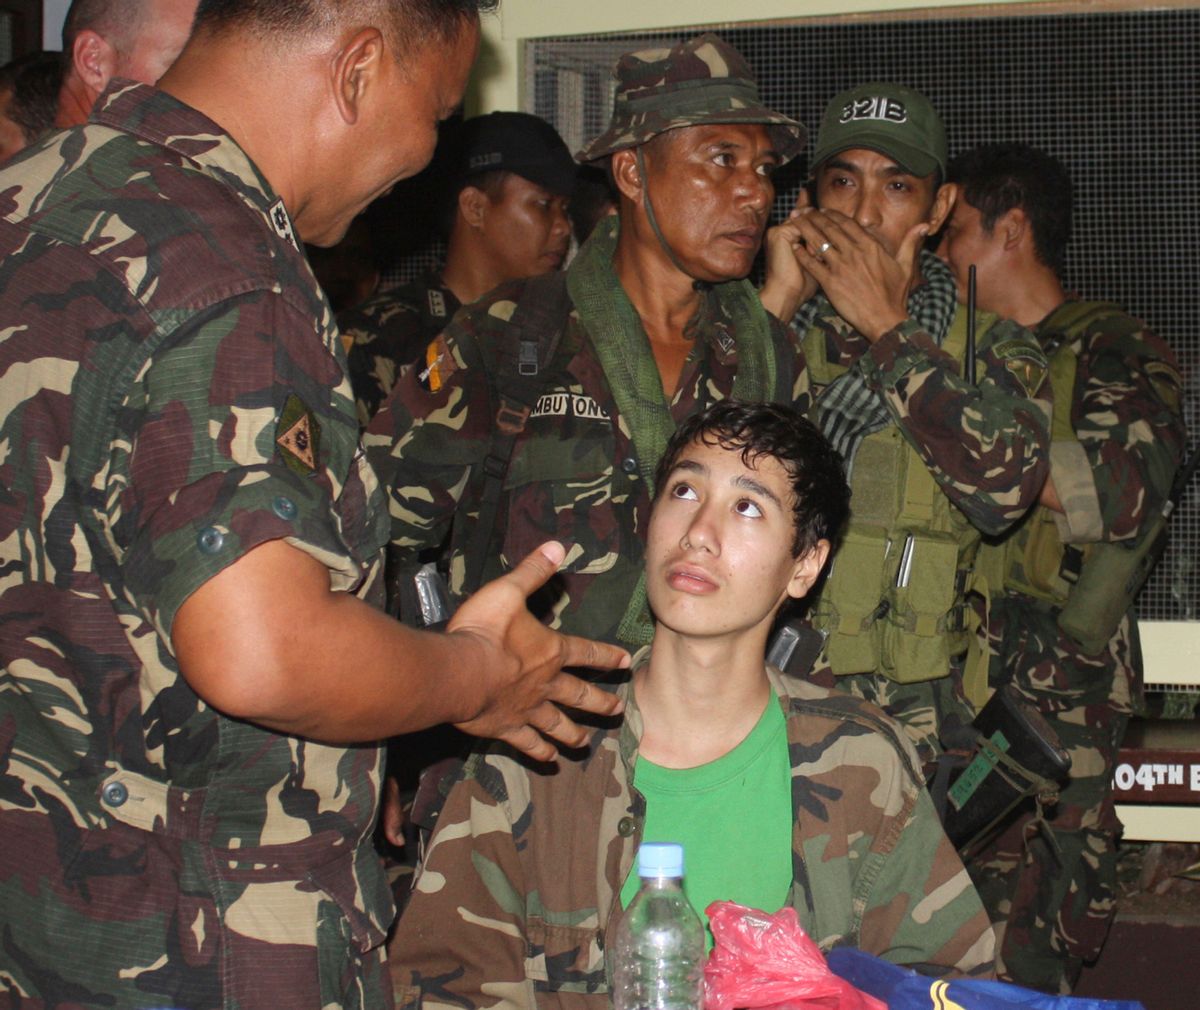 In this photo taken Saturday Dec. 10, 2011, Kevin Lunsman, a kidnapped American teenage boy, talks to Filipino soldiers inside the Philippine military compound in Zamboanga city, southern Philippines following his escape from suspected al-Qaida-linked militants. Lunsman, 14, wandered without shoes for two days in a southern Philippine jungle before villagers found him, ending his five-month captivity, officials said Sunday. Lunsmann, claimed to have told his four armed captors that he would take a bath in a stream and then made a dash for freedom Friday in Basilan province, police Senior Supt. Edwin de Ocampo said. He followed a river down a mountain until villagers found him late the next day, de Ocampo said. (AP Photo) (Anonymous)